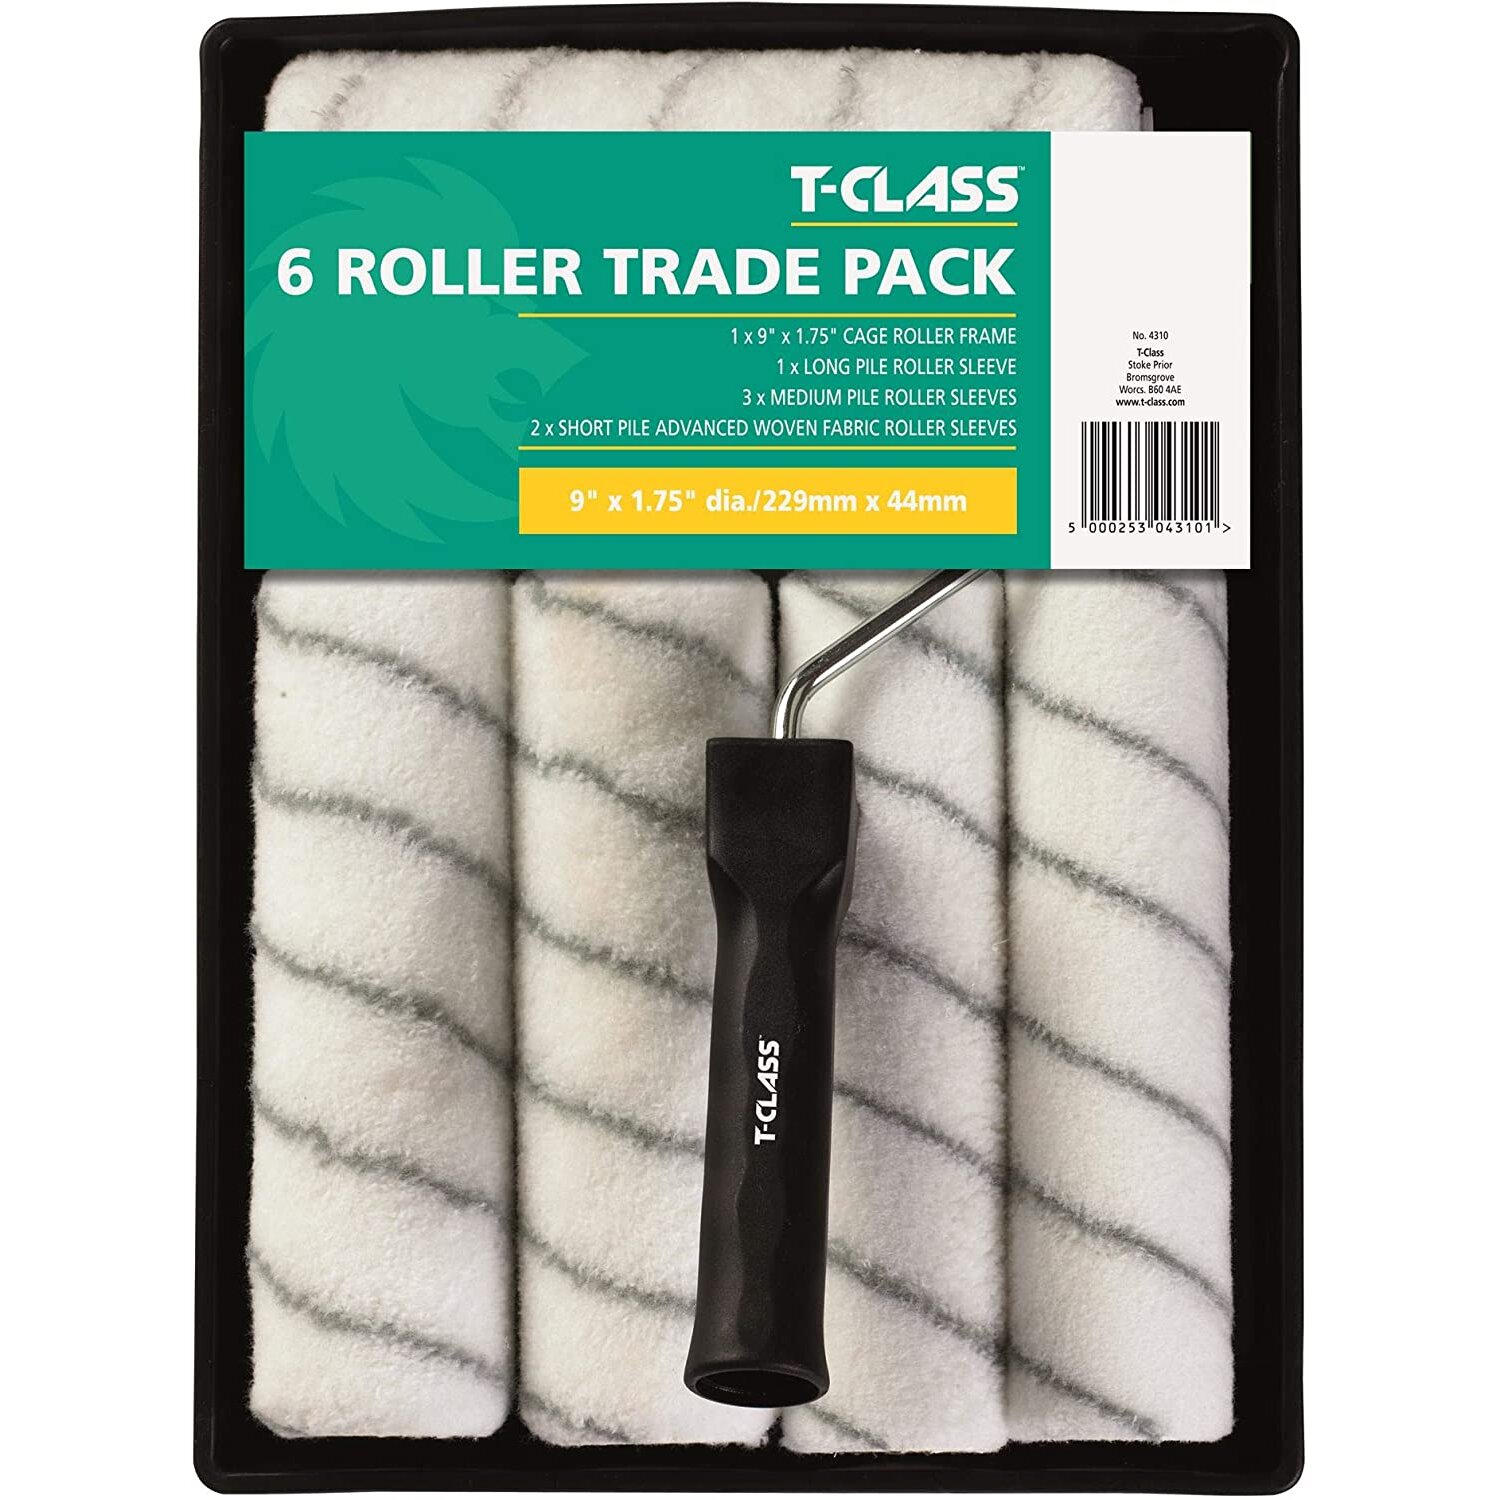 T Class 4310 Roller Sleeves 6 Pack